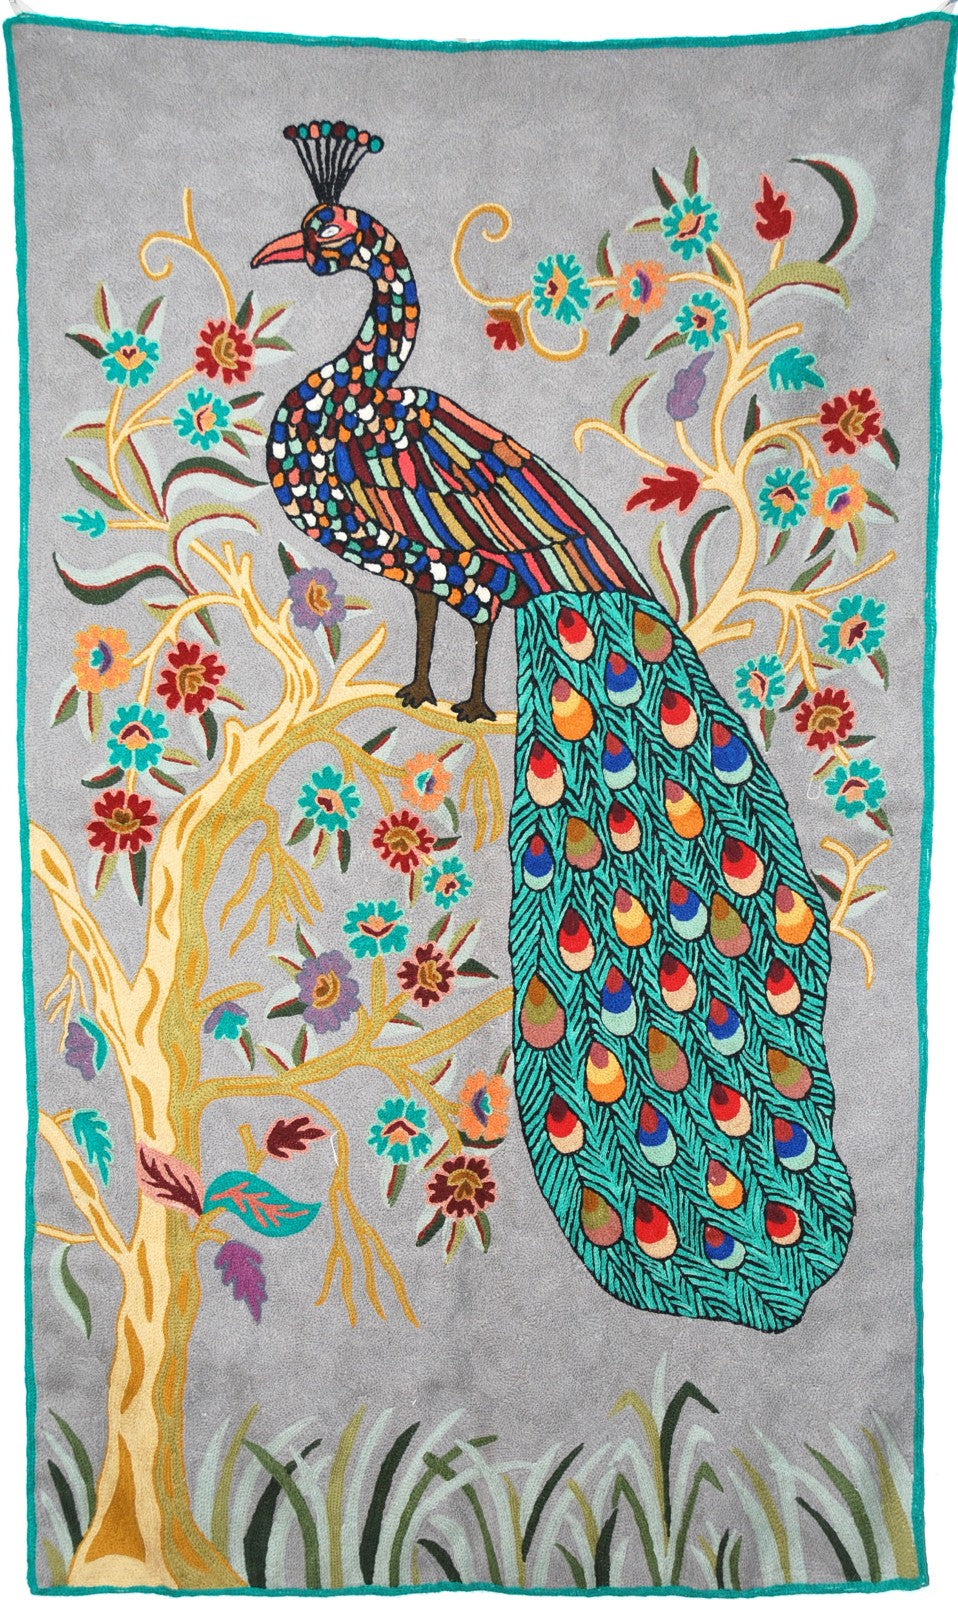 ChainStitch Tapestry Woolen Area Rug "Peacock", Multicolor Embroidery 3x5 feet #CWR15121